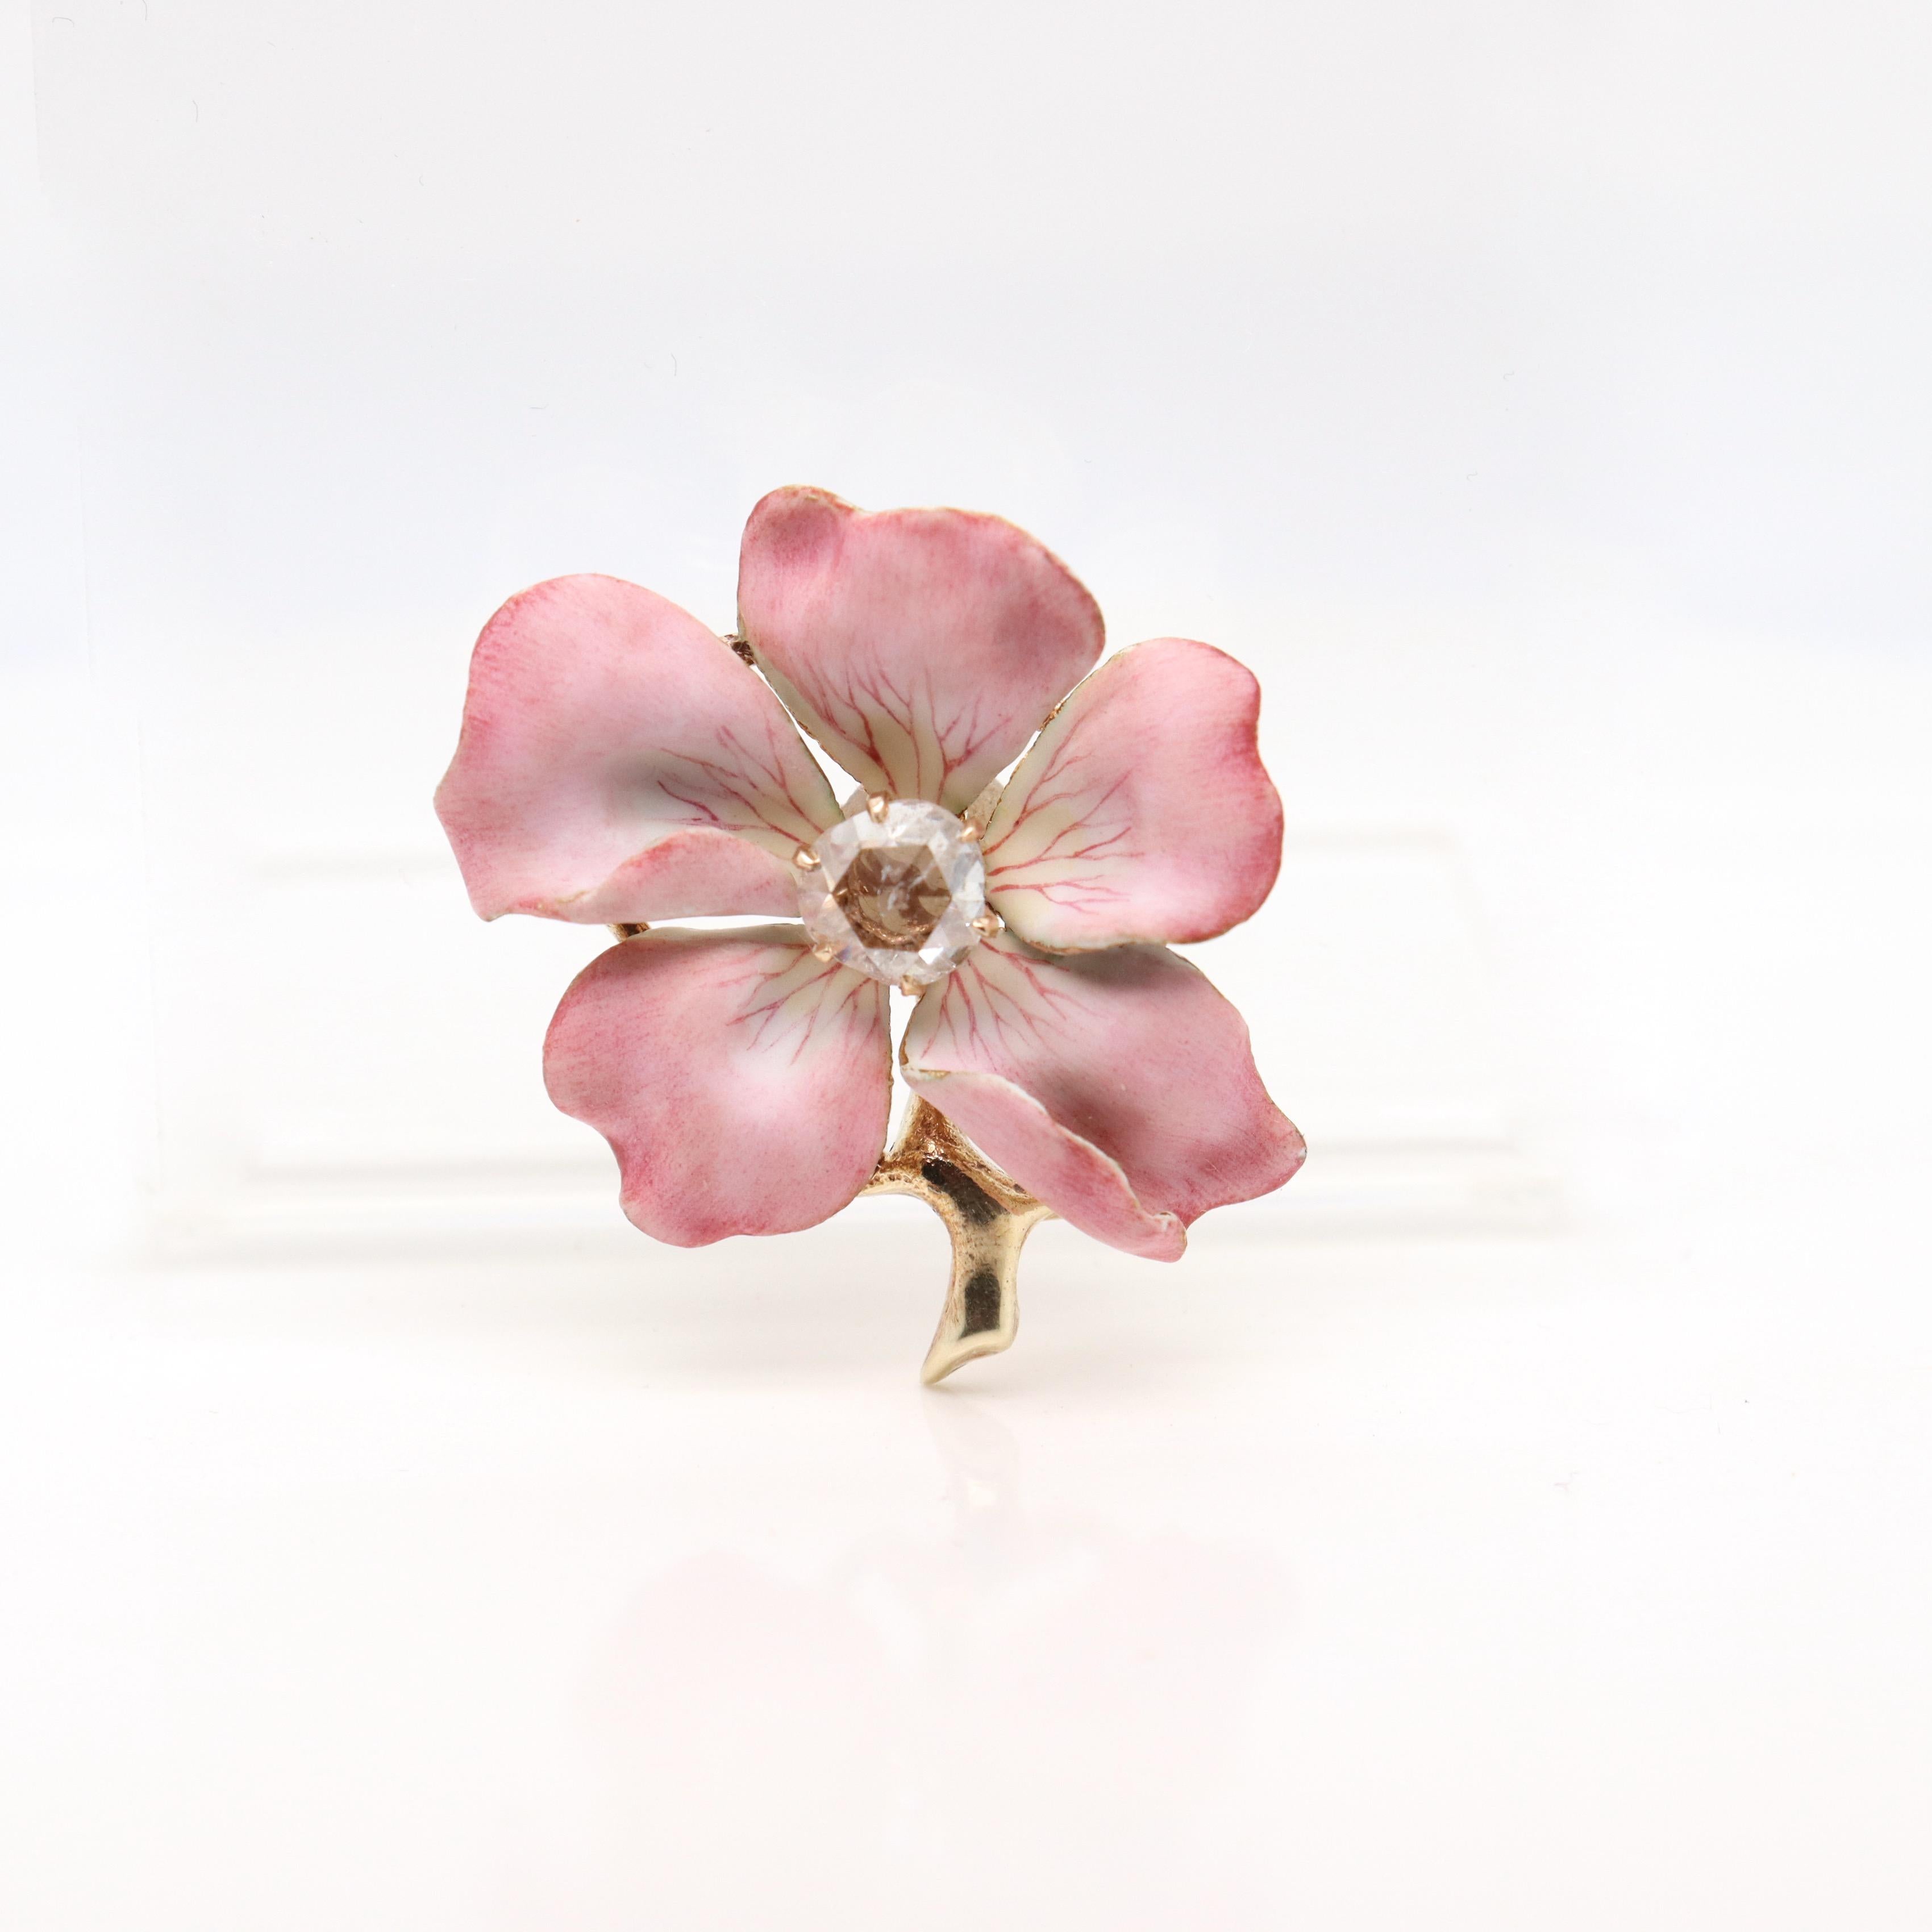 A fine antique figural flower brooch.

In the form of a 5 petal dogwood or pansy flower with pale pink & yellow petals and a gold stem.

Prong-set with an off-round rose cut diamond to the center of the flower.

Simply a wonderful